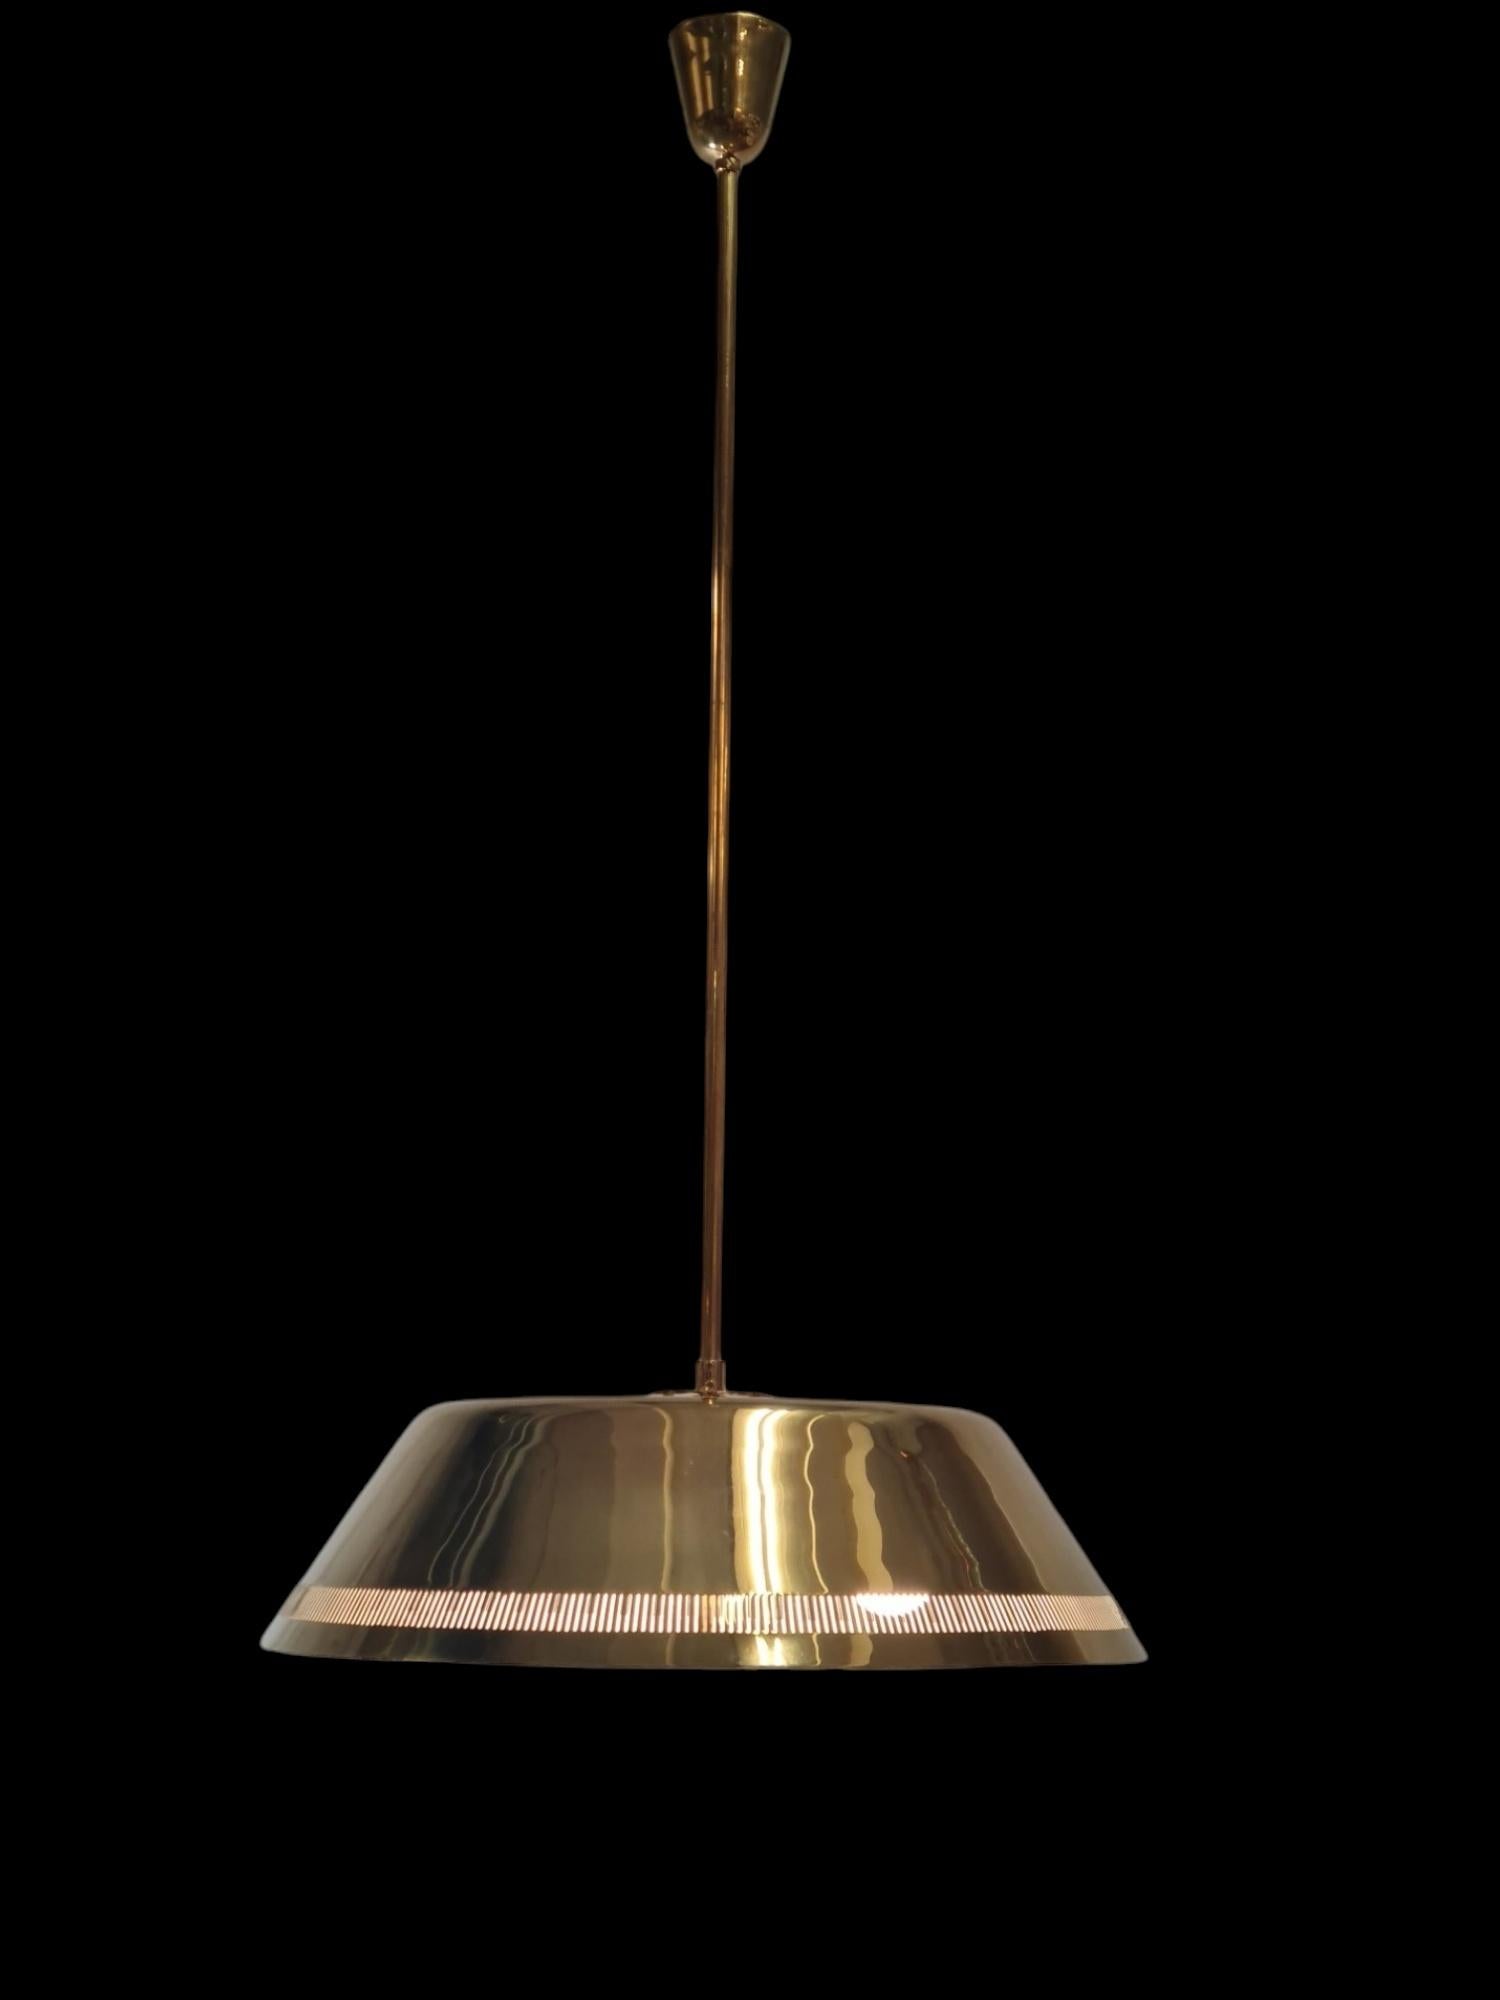 Scandinavian Modern A Magnificent Paavo Tynell Ceiling Lamp Model 82500 for Idman, 1950s For Sale